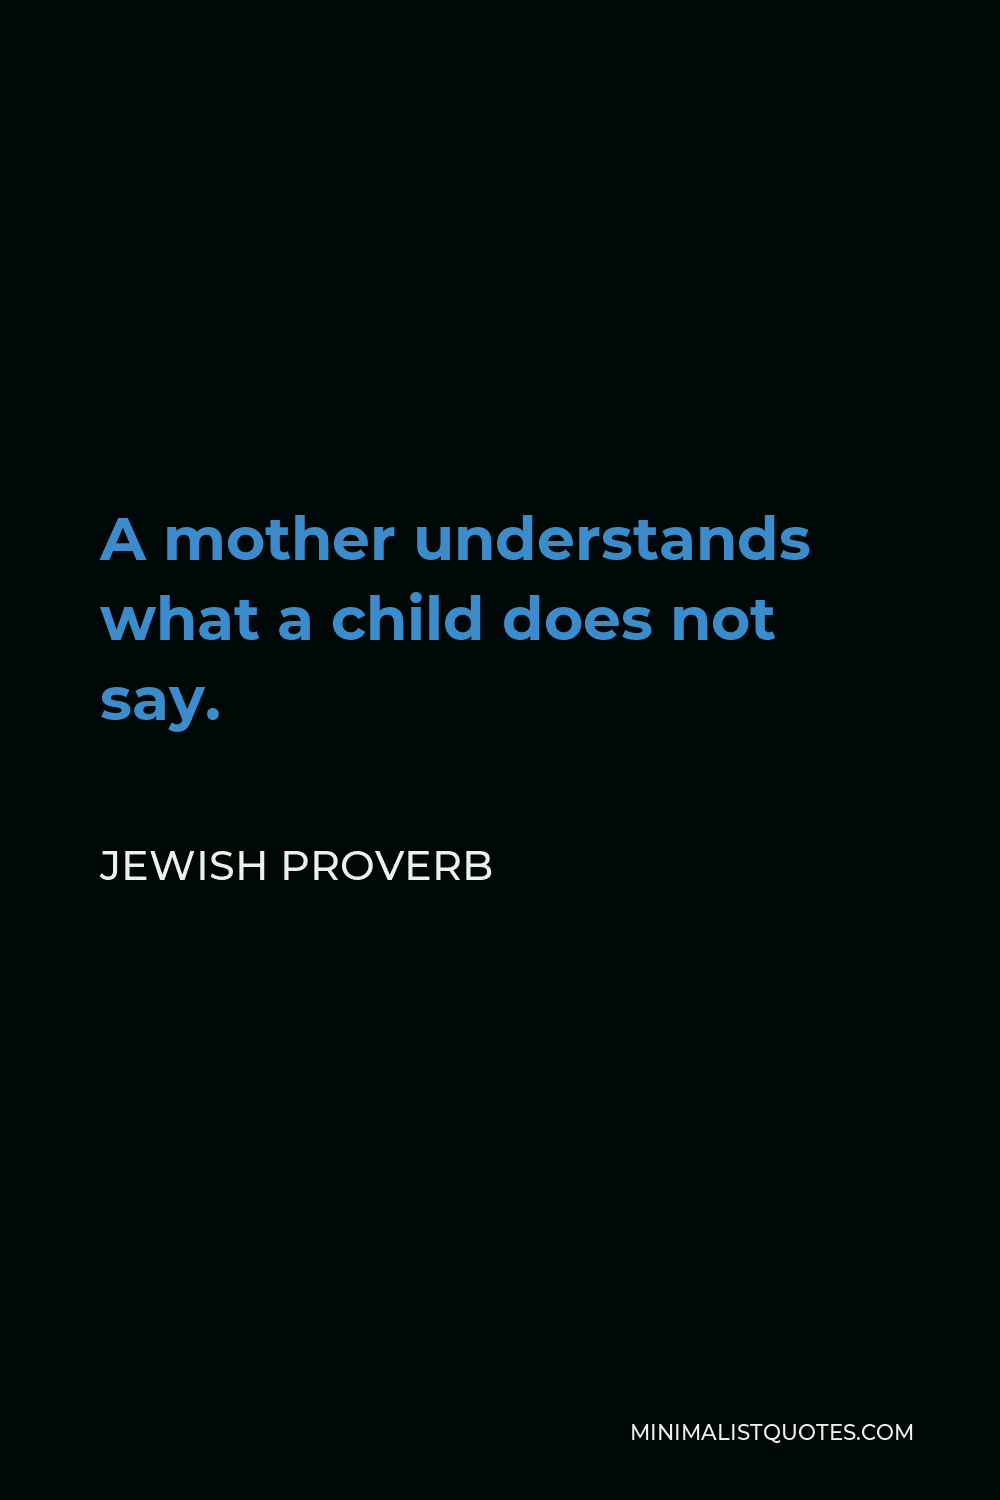 Jewish Proverb Quote - A mother understands what a child does not say.